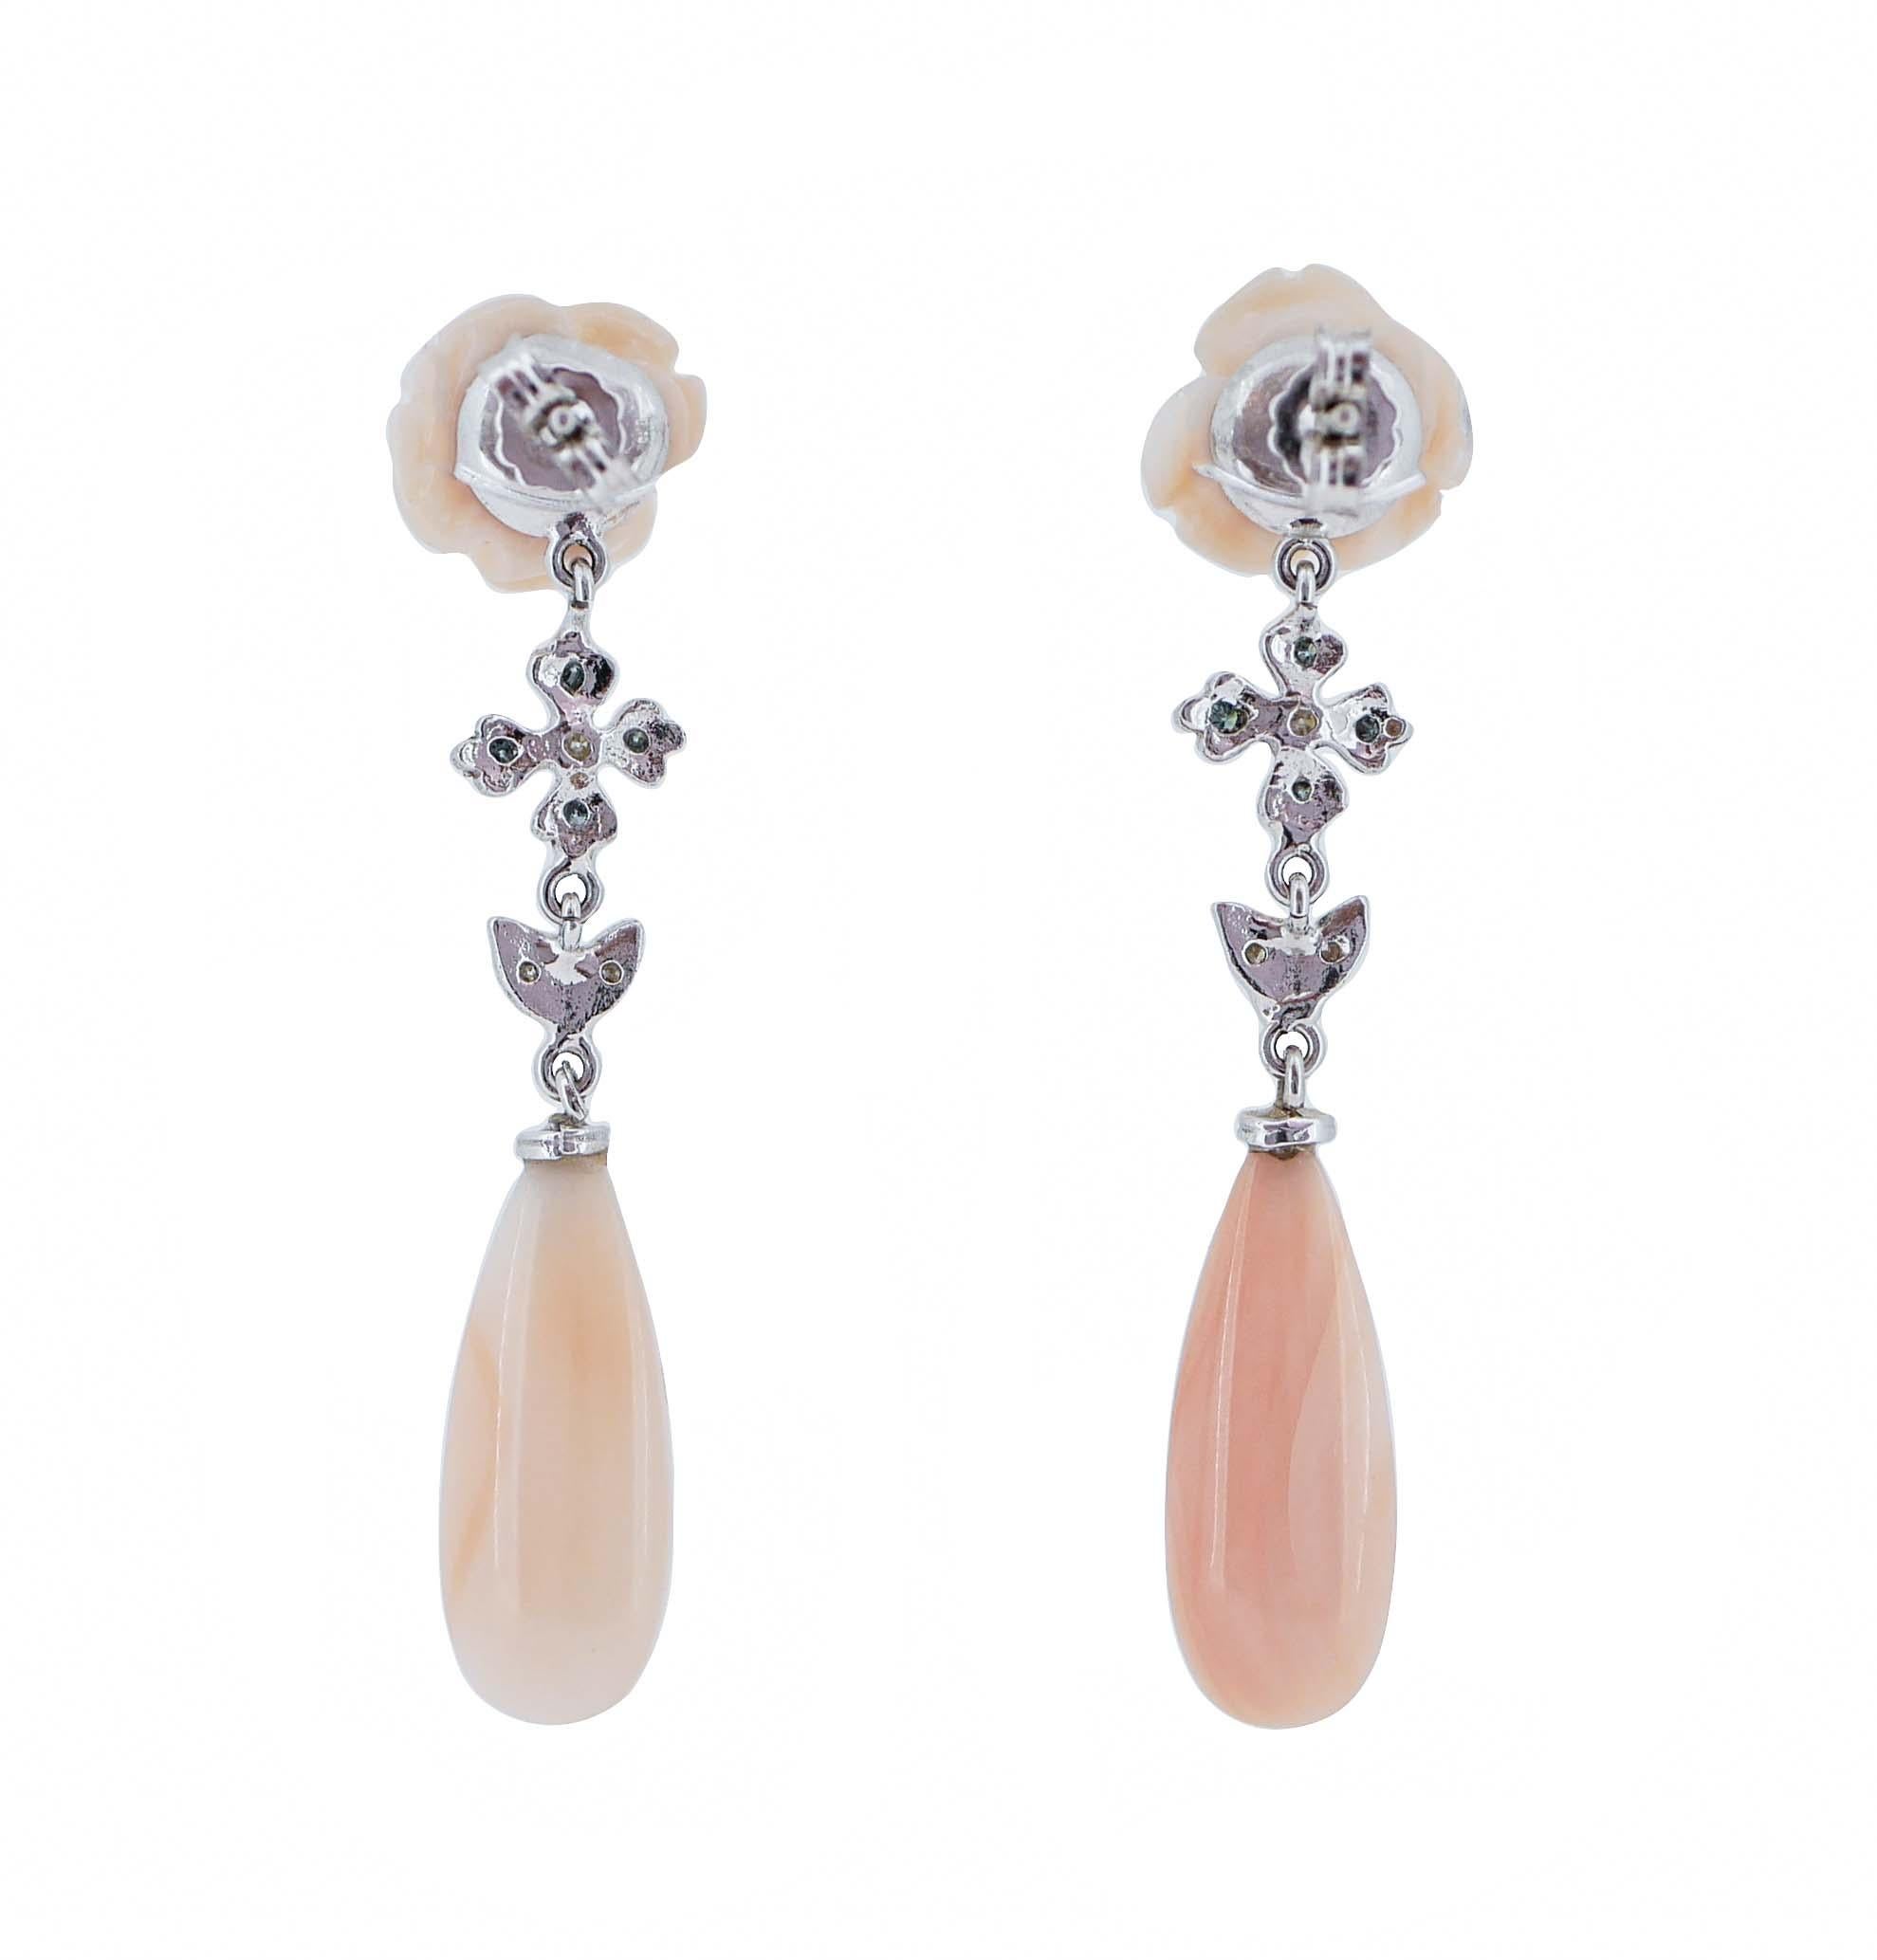 Retro White and Blue Fancy Diamonds, Pink Coral, 14 Karat  White Gold Drop Earrings. For Sale